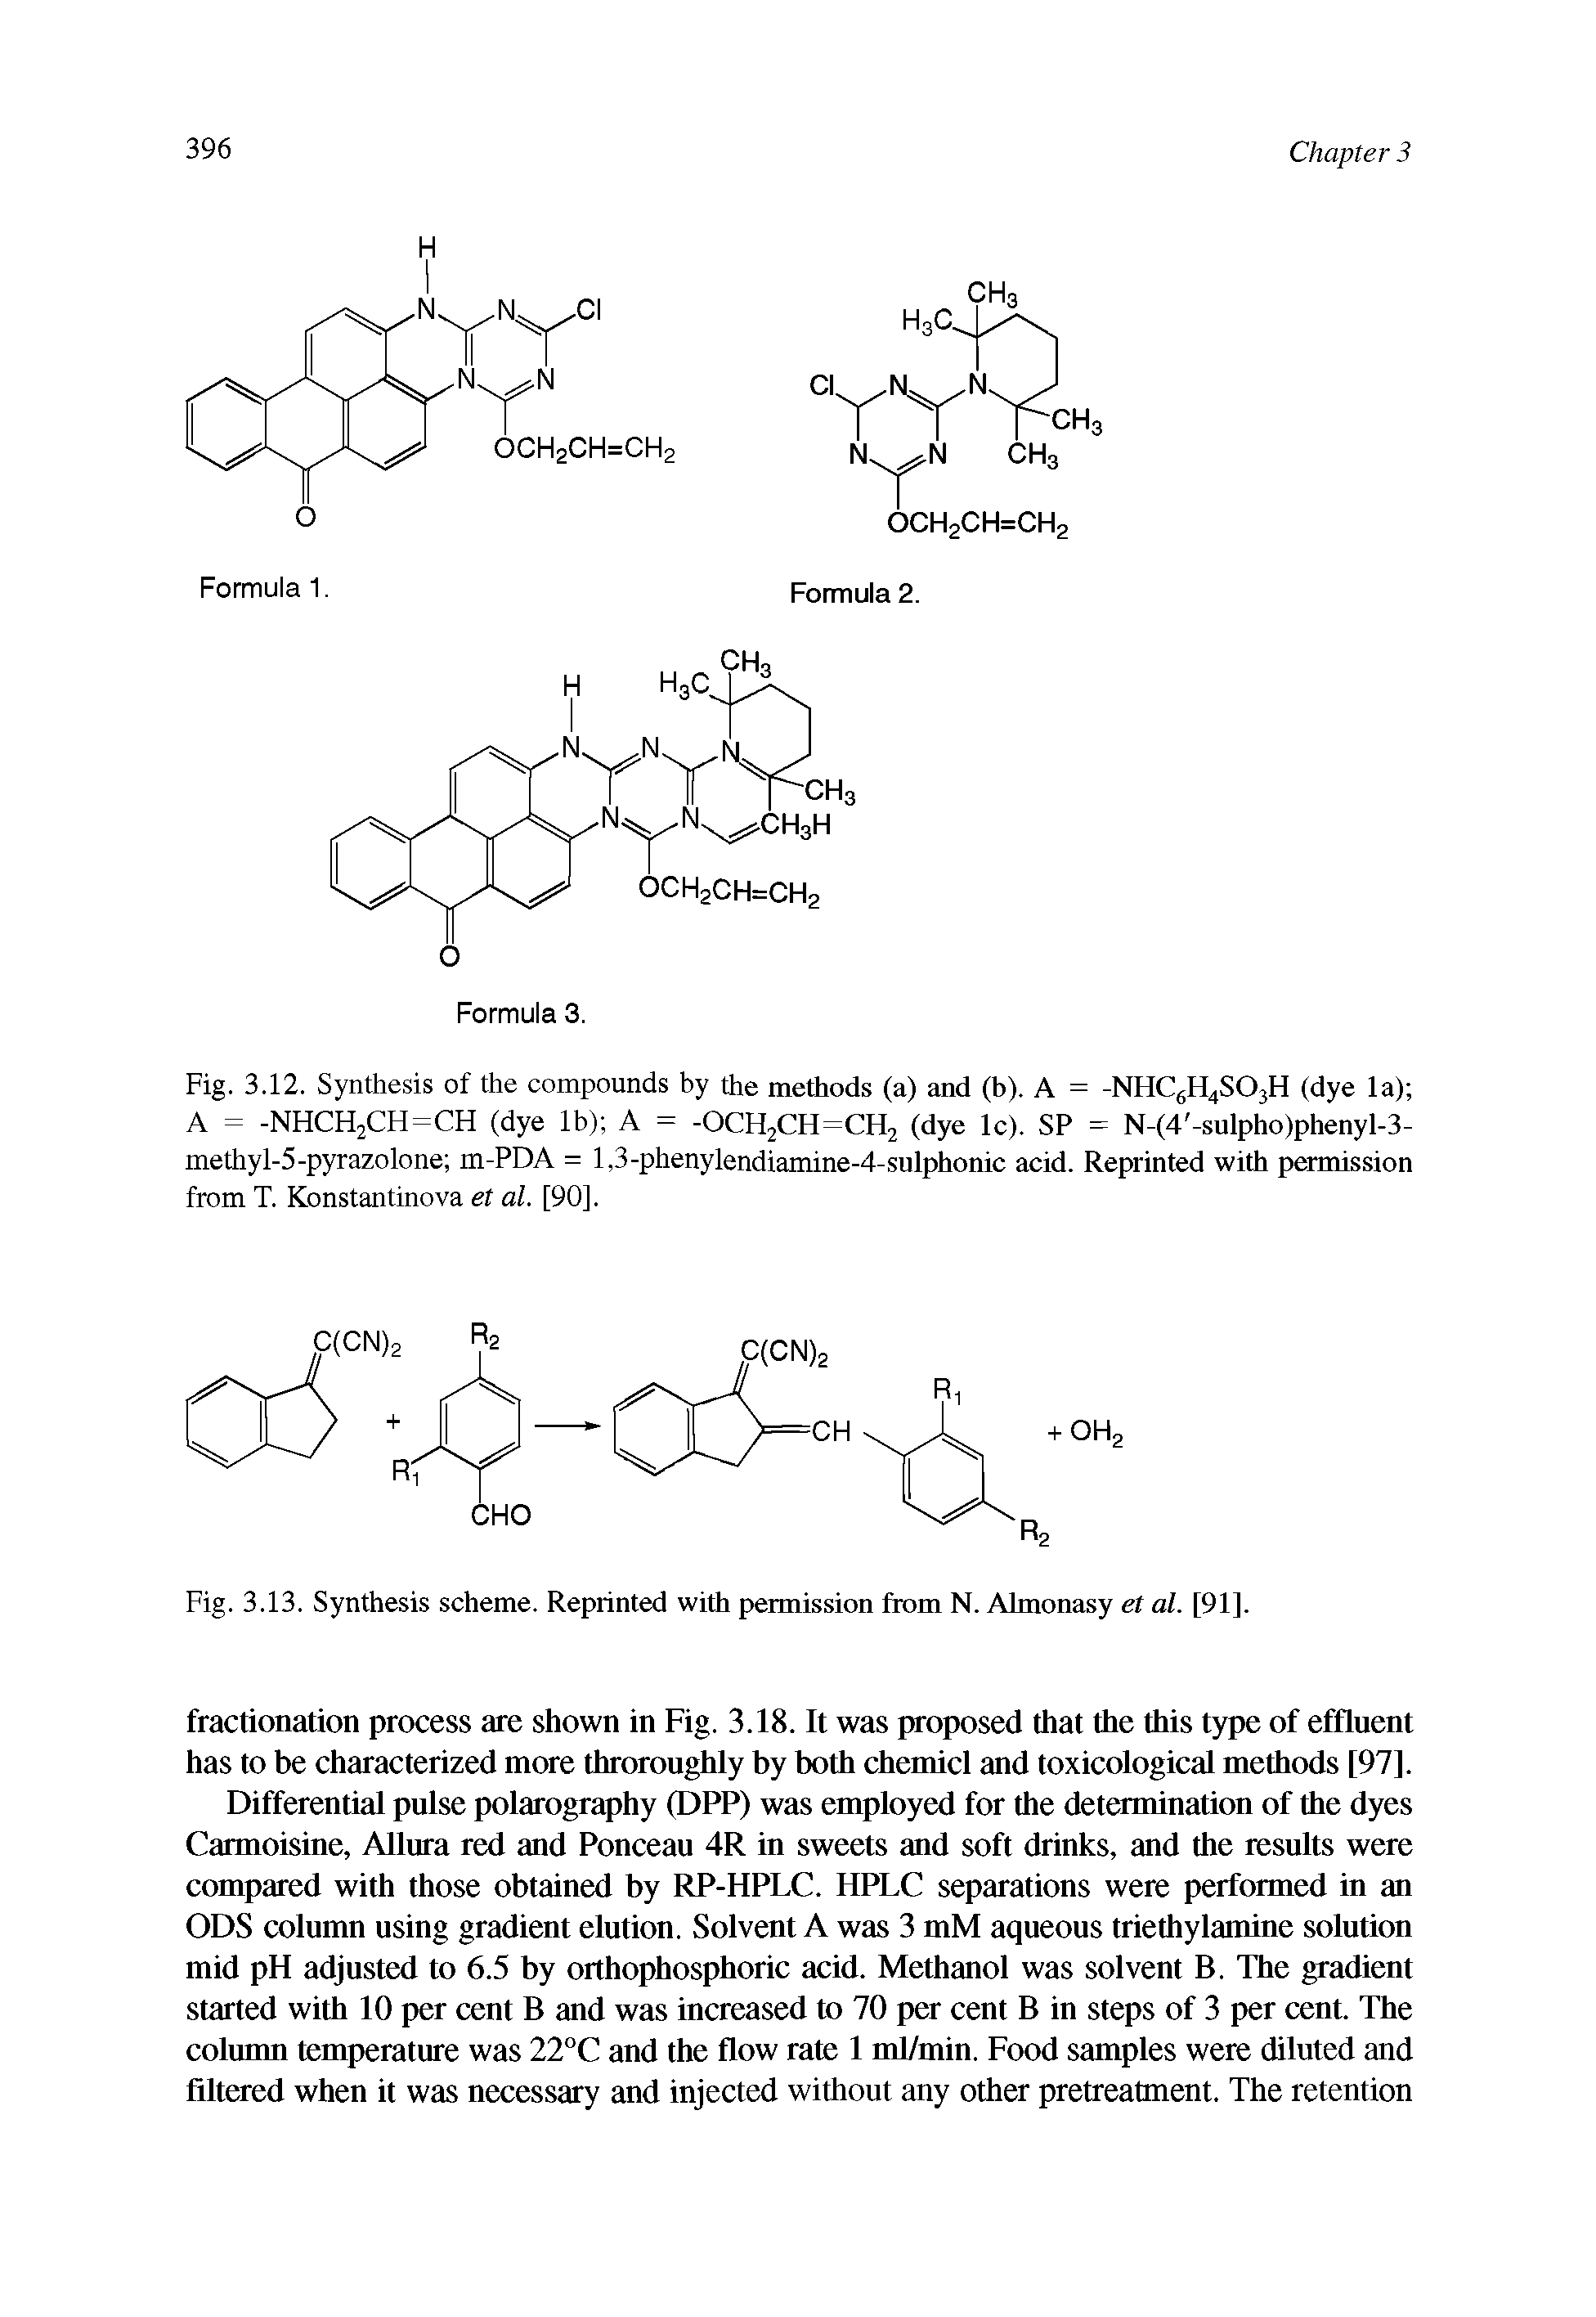 Fig. 3.12. Synthesis of the compounds by the methods (a) and (b). A = -NHC6H4S03H (dye la) A = -NHCH2CH=CH (dye lb) A = -OCH2CH=CH2 (dye lc). SP = N-(4 -sulpho)phenyl-3-methy 1-5-pyrazolone m-PDA = l,3-phenylendiamine-4-sulphonic acid. Reprinted with permission from T. Konstantinova et al. [90],...